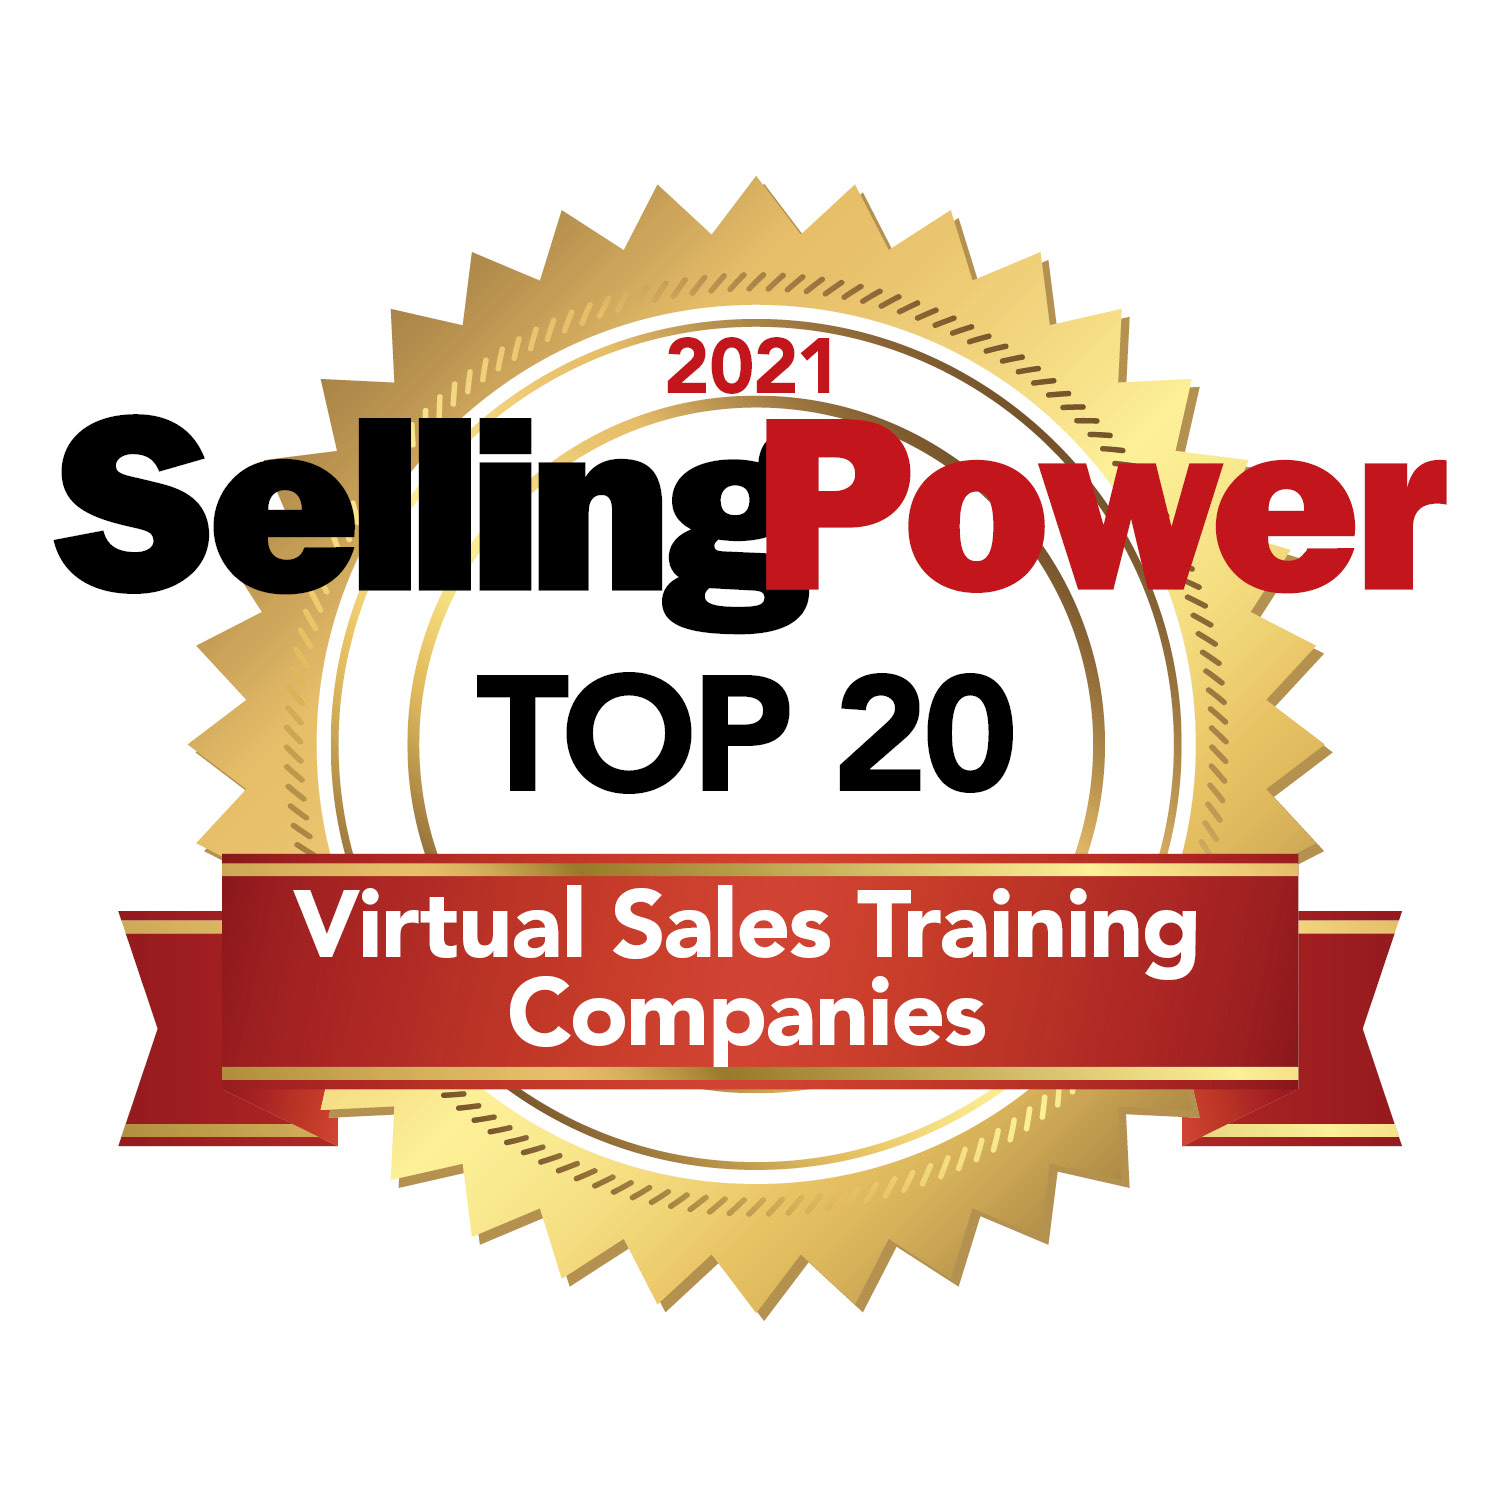 Logo for the Selling Power Top Virtual Sales Training Companies in 2021